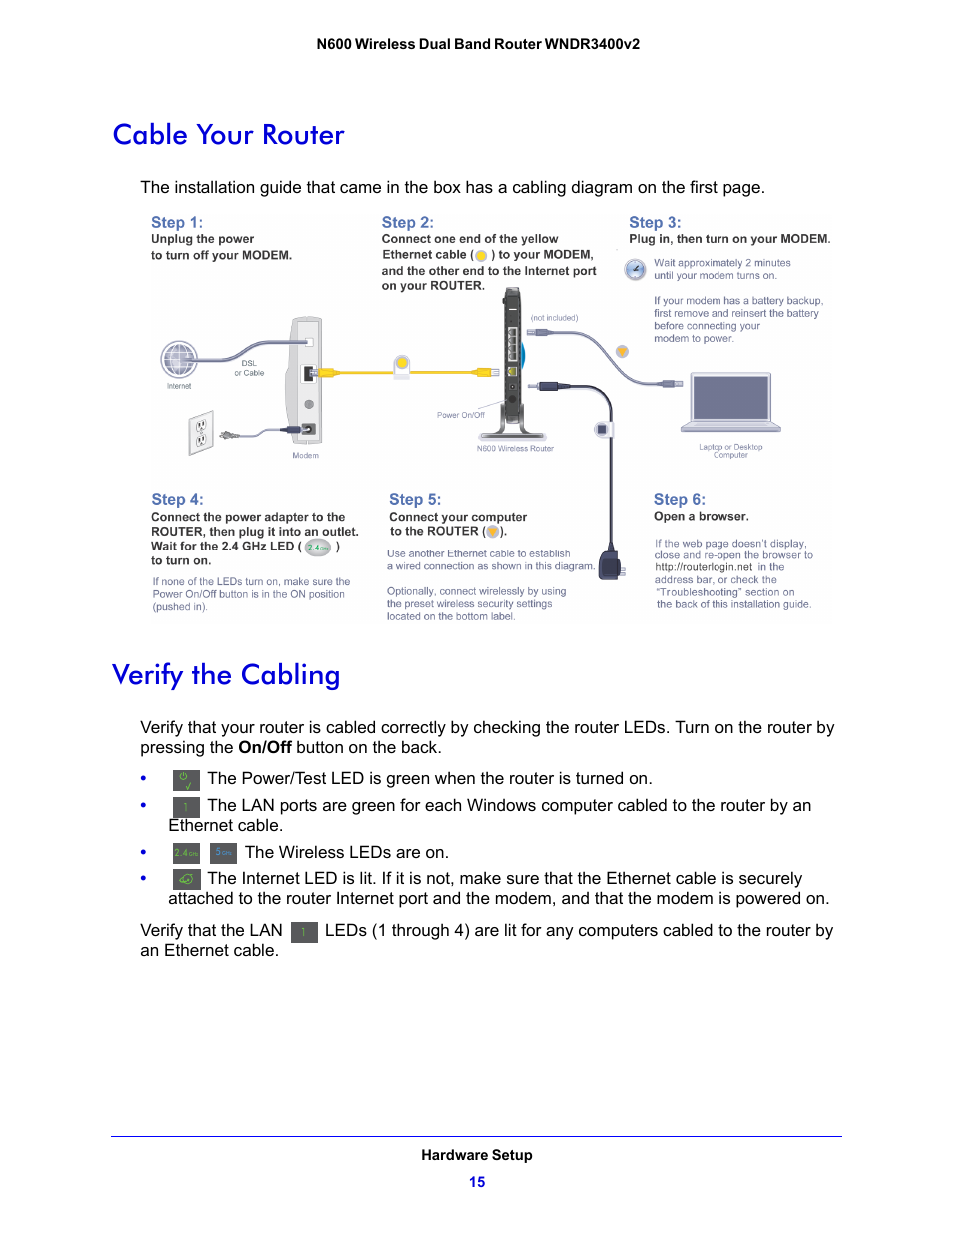 Cable your router, Verify the cabling, Cable your router verify the cabling | NETGEAR N600 Wireless Dual Band Router WNDR3400v2 User Manual | Page 15 / 120